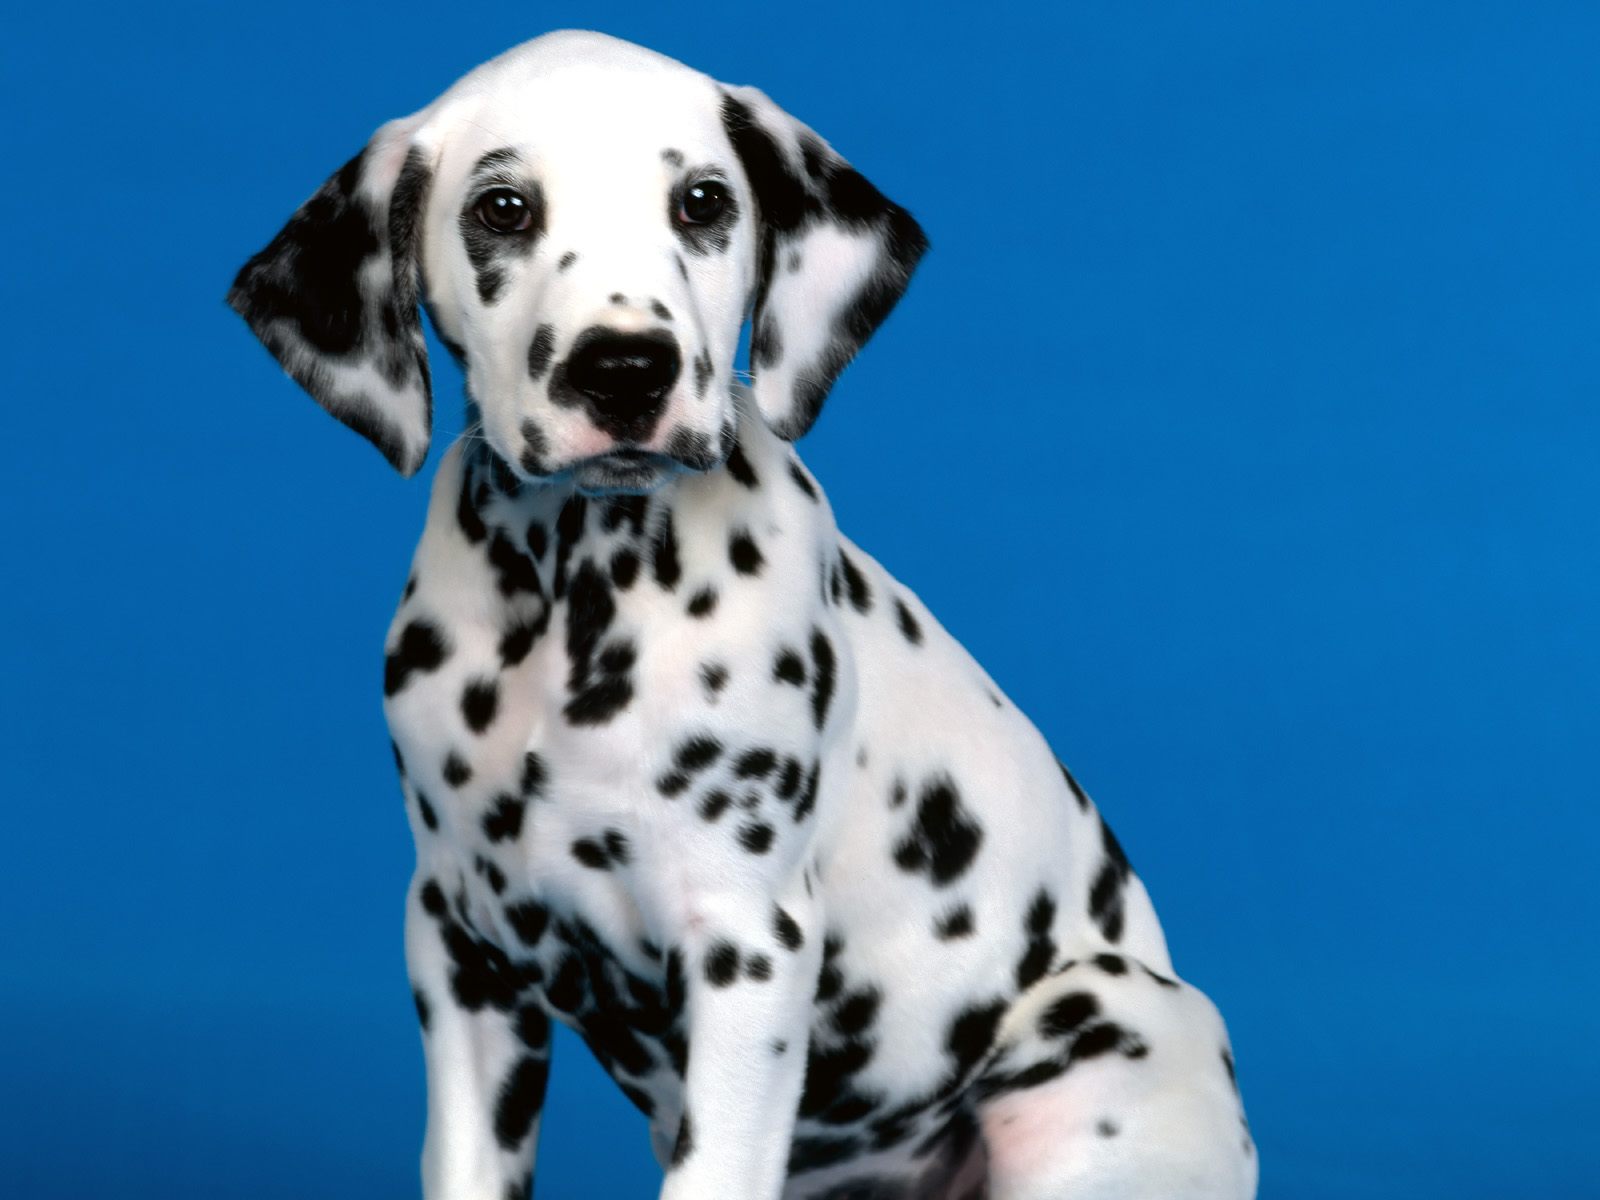 hd wallpapers blue background dalmation dog cool desktop images widescreen